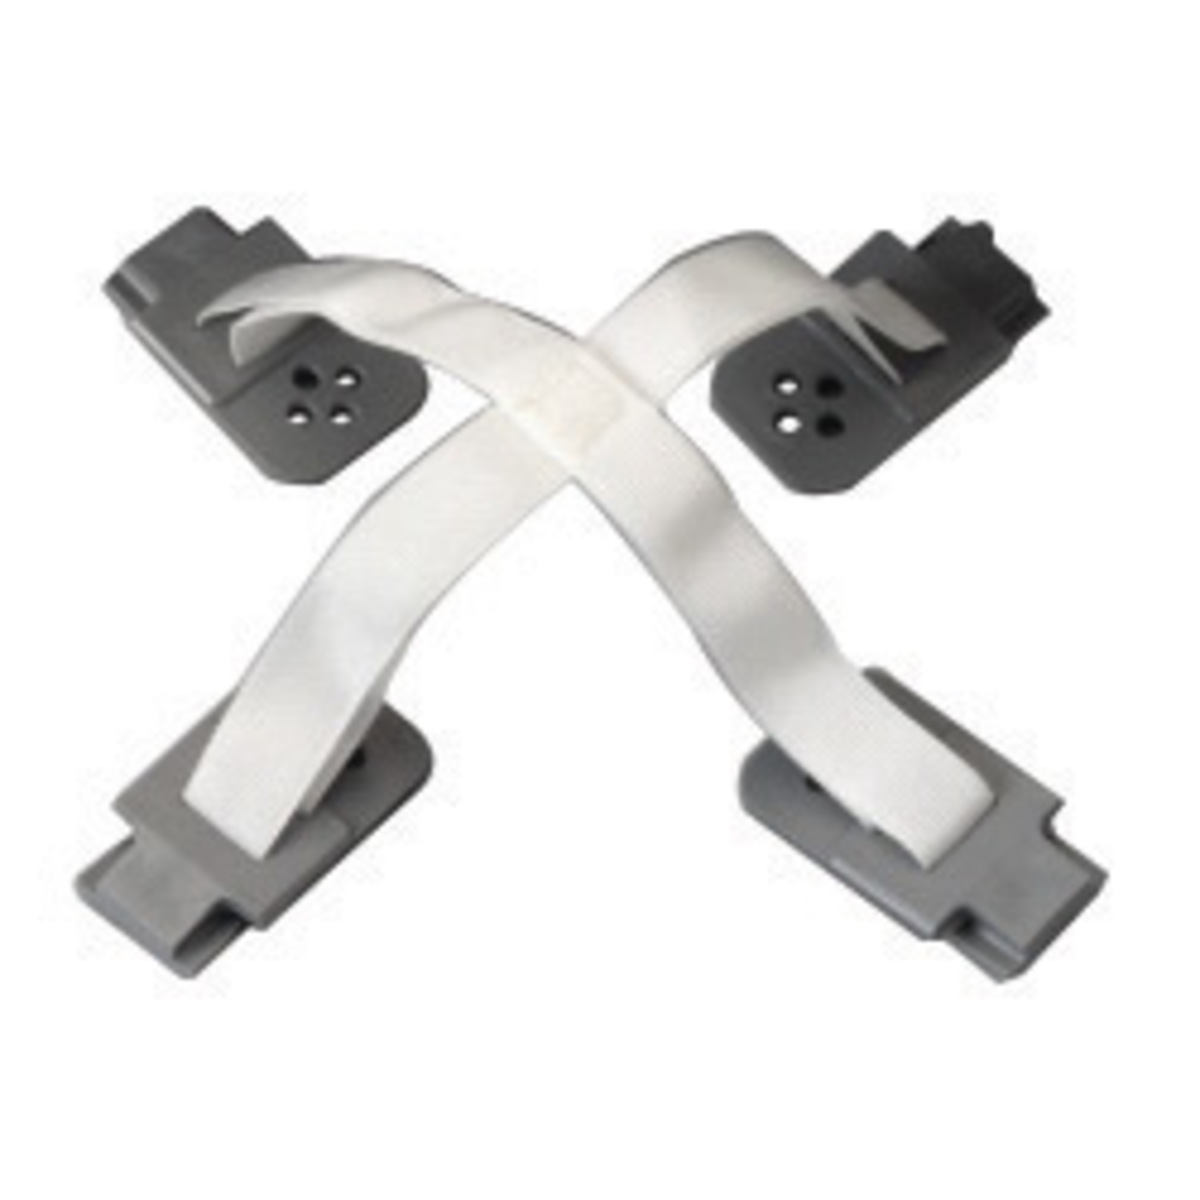 3M™ Crown Strap Assembly (For Use With W2878, W2879 And H113 Whitecap™ Helmet Suspensions)